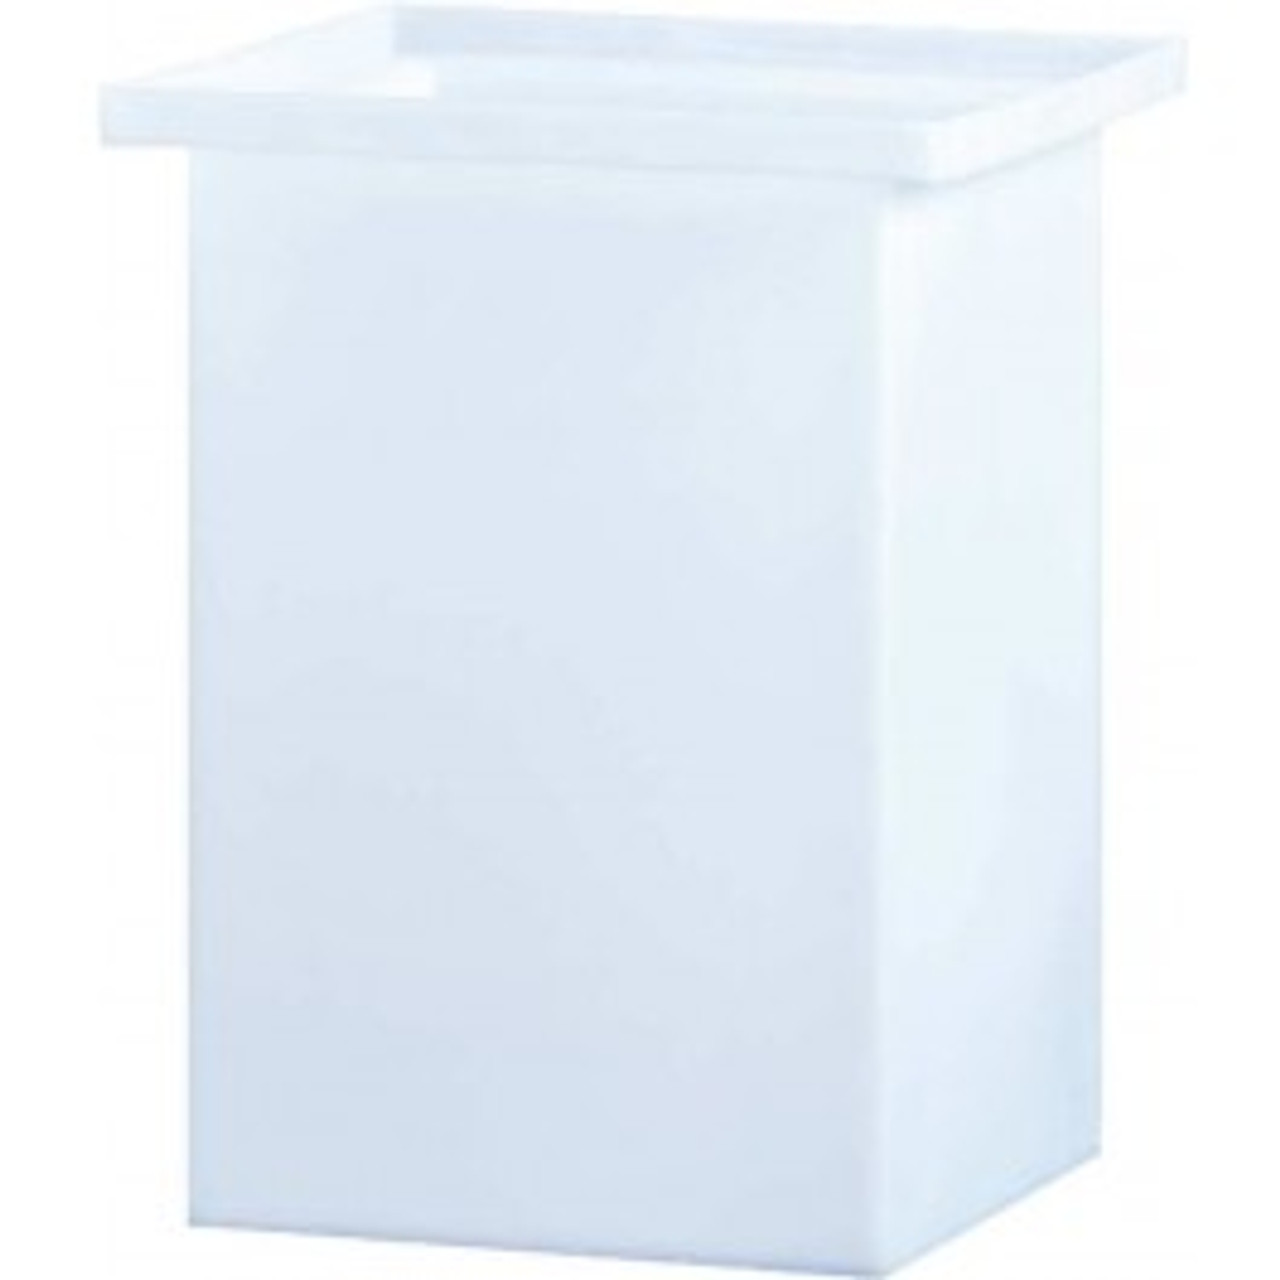 An image of a 18 Gallon PE Chem-Tainer White Rectangular Open Top Tank | R121230A